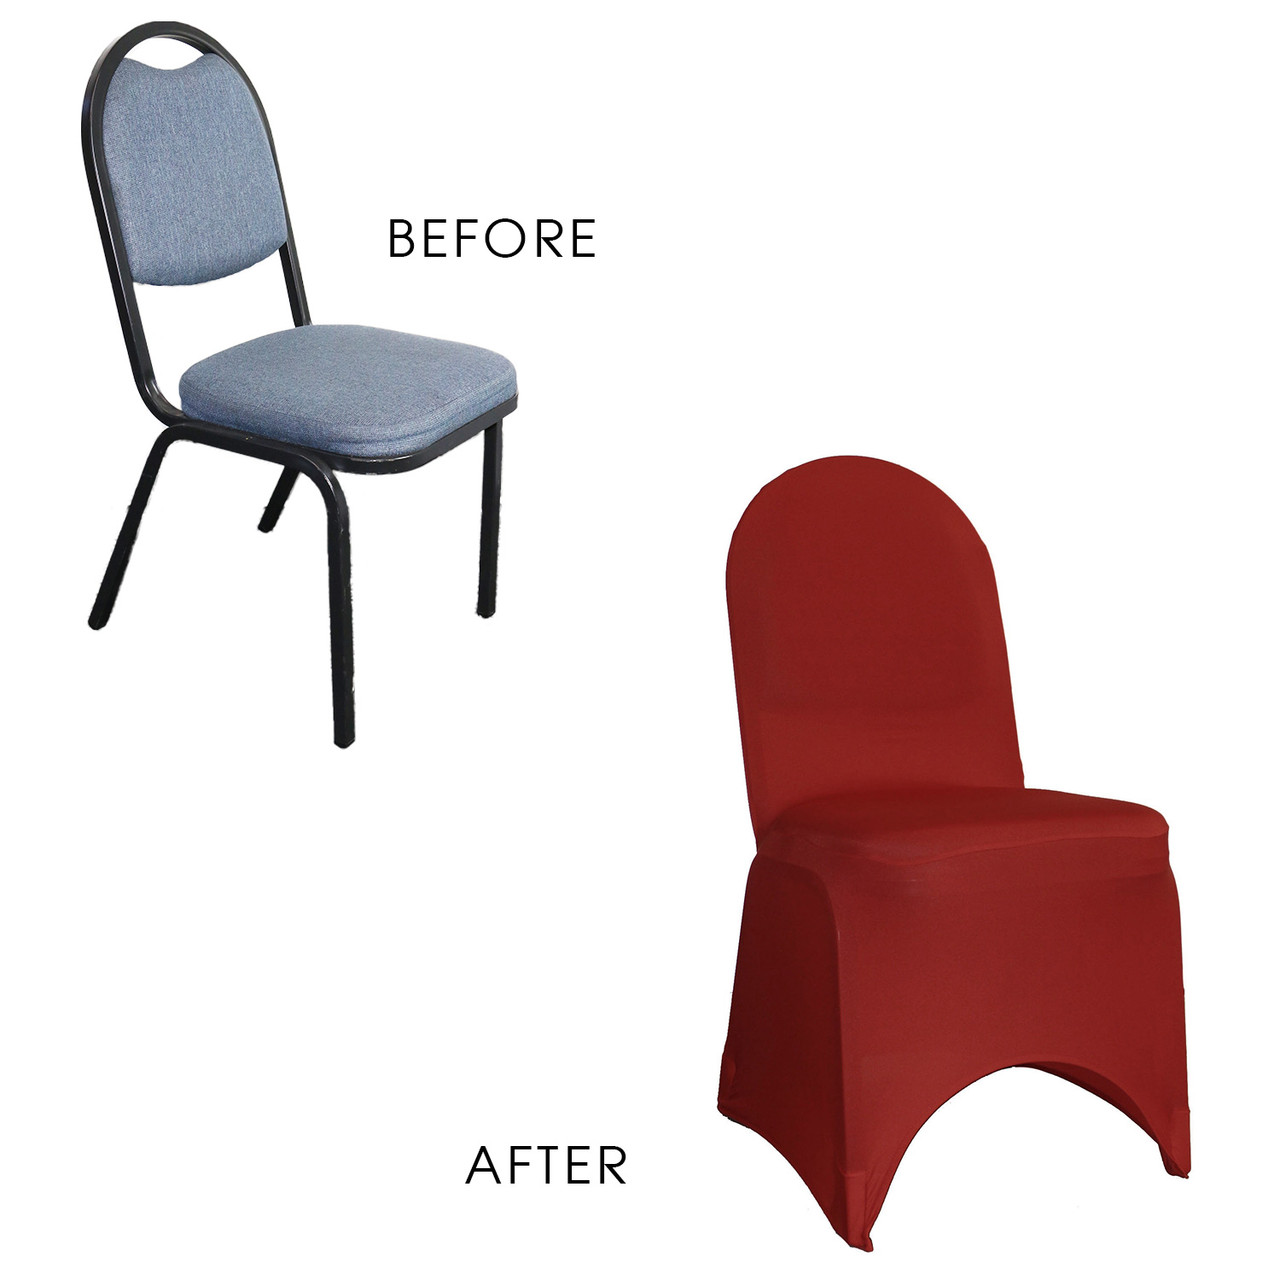 Your Chair Covers - Spandex Folding Chair Cover Red for Wedding, Party, Birthday, Patio, etc. - image 5 of 5